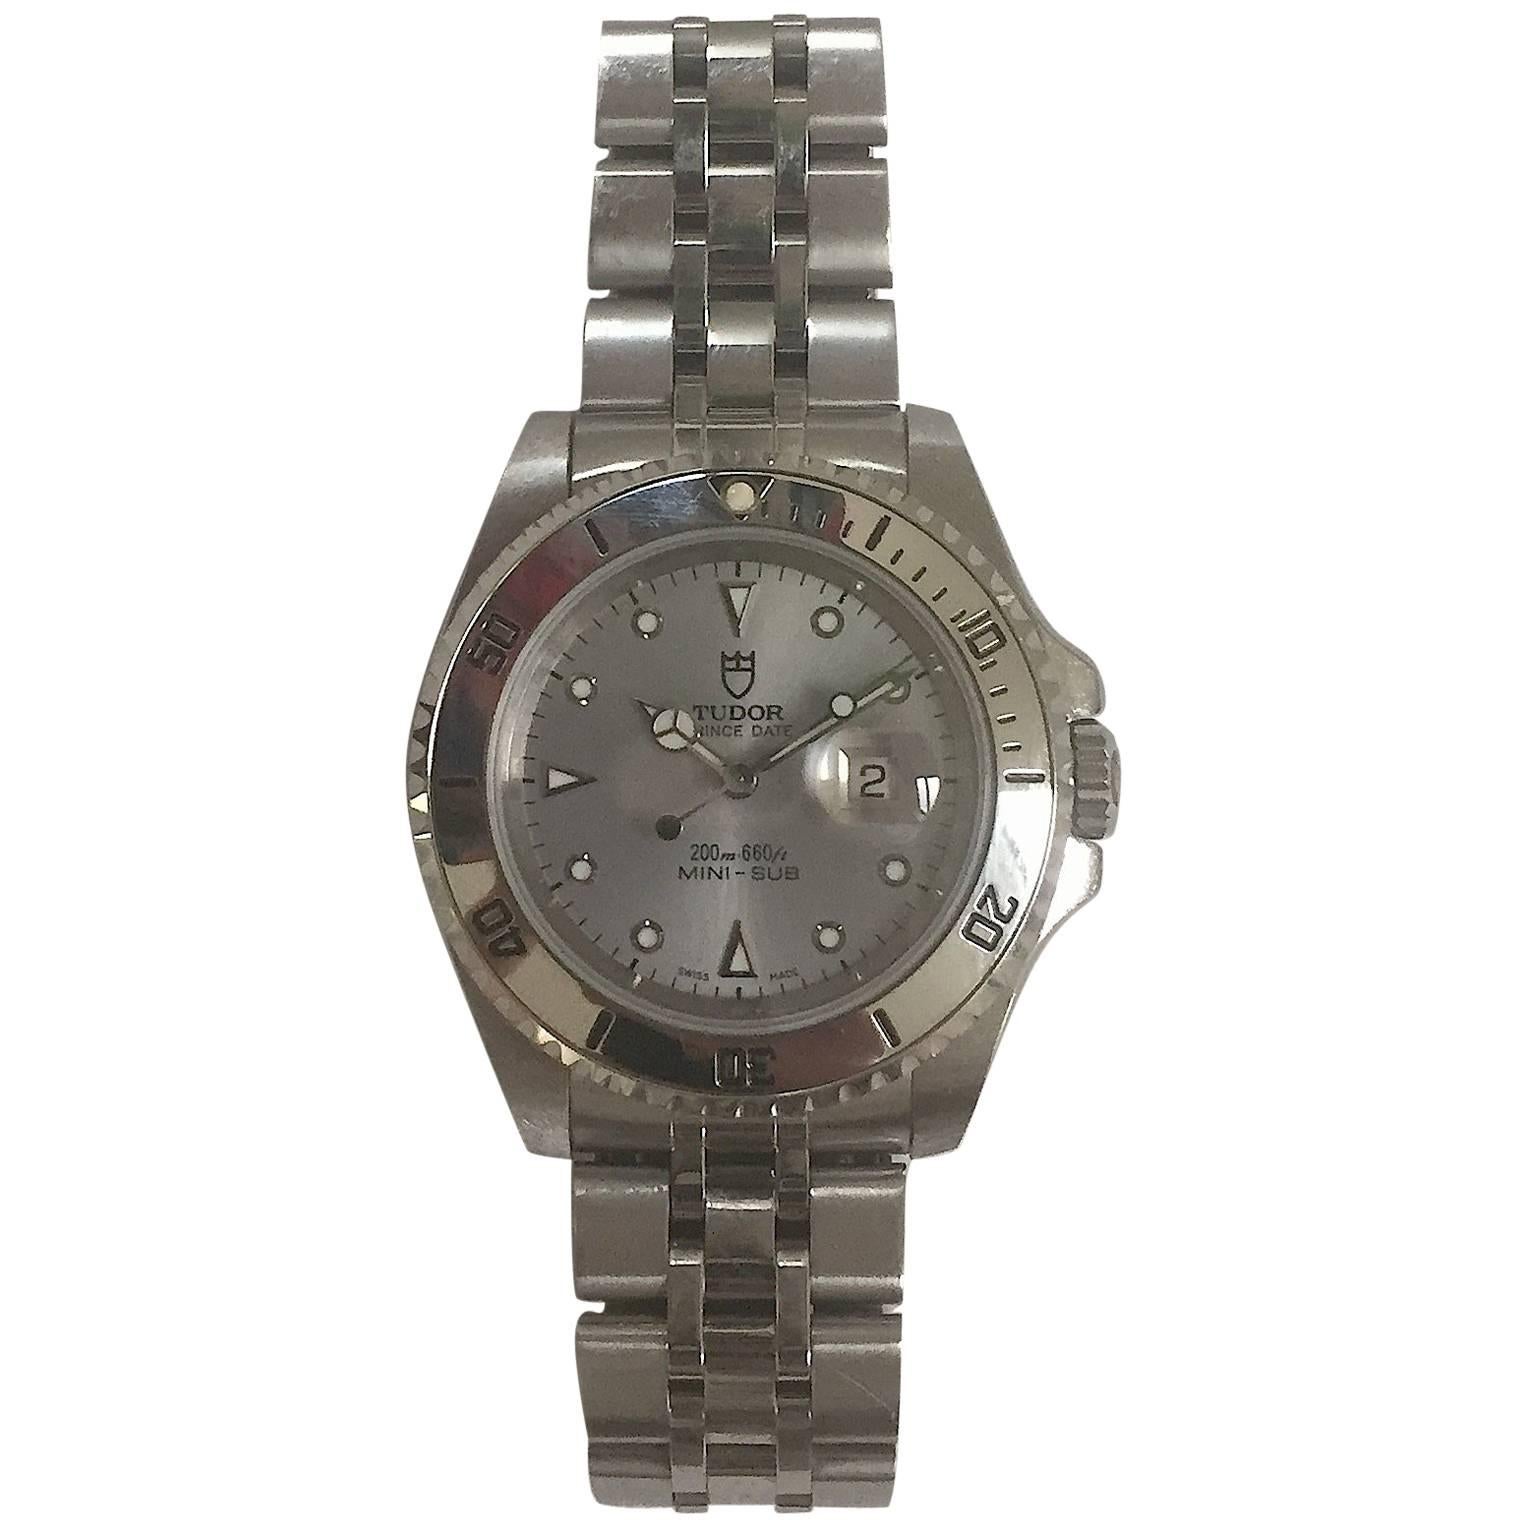 Tudor Stainless Steel Prince Date Mini Sub Automatic Wristwatch For Sale